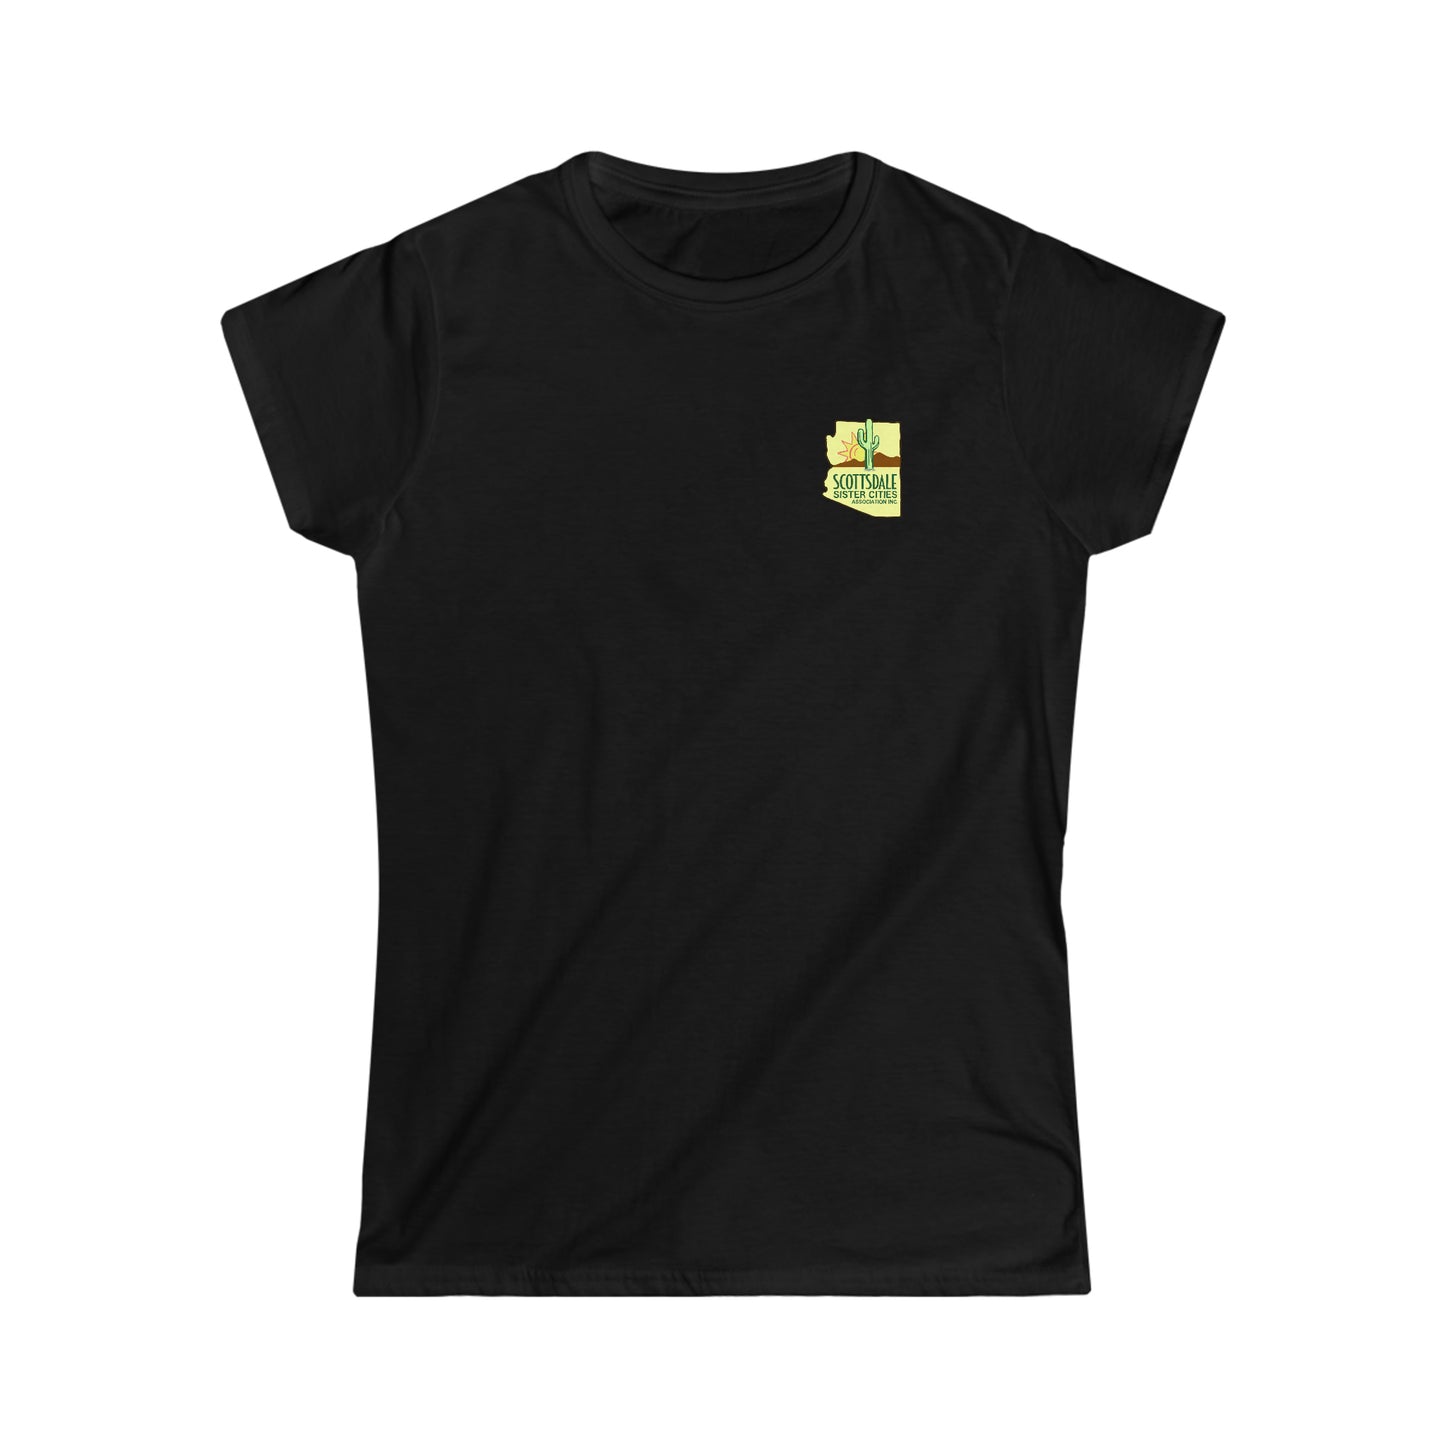 SSCA Logo Women's Fit Softstyle Tee